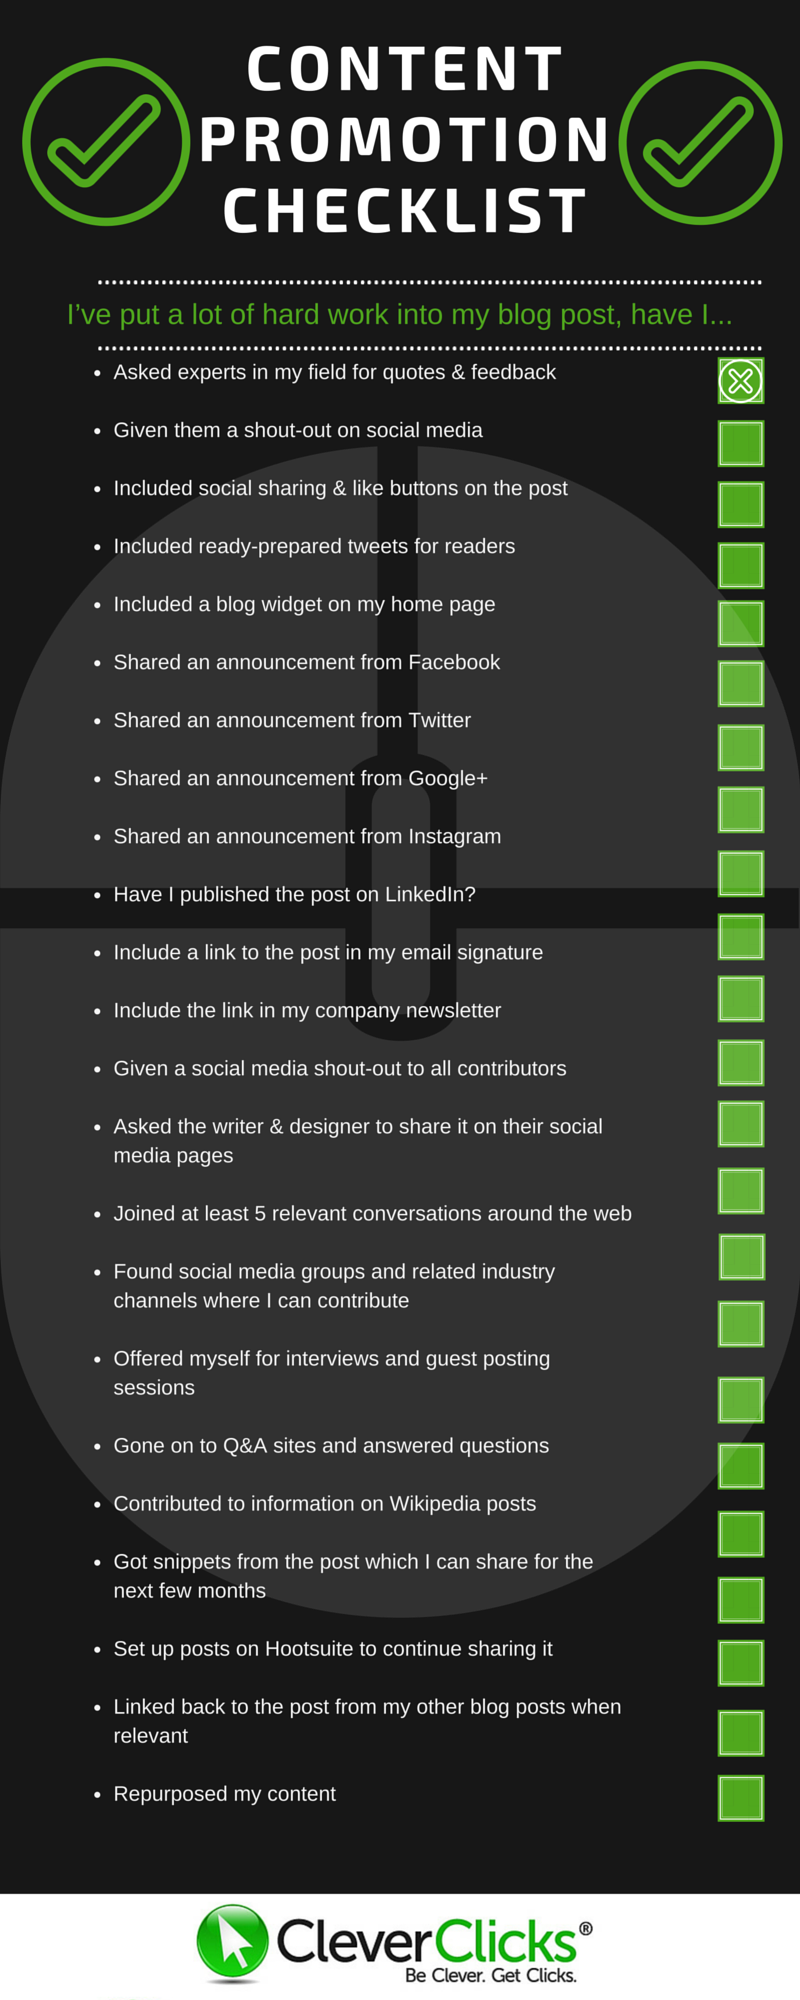 Content Promotion Checklist infographic from CleverClicks